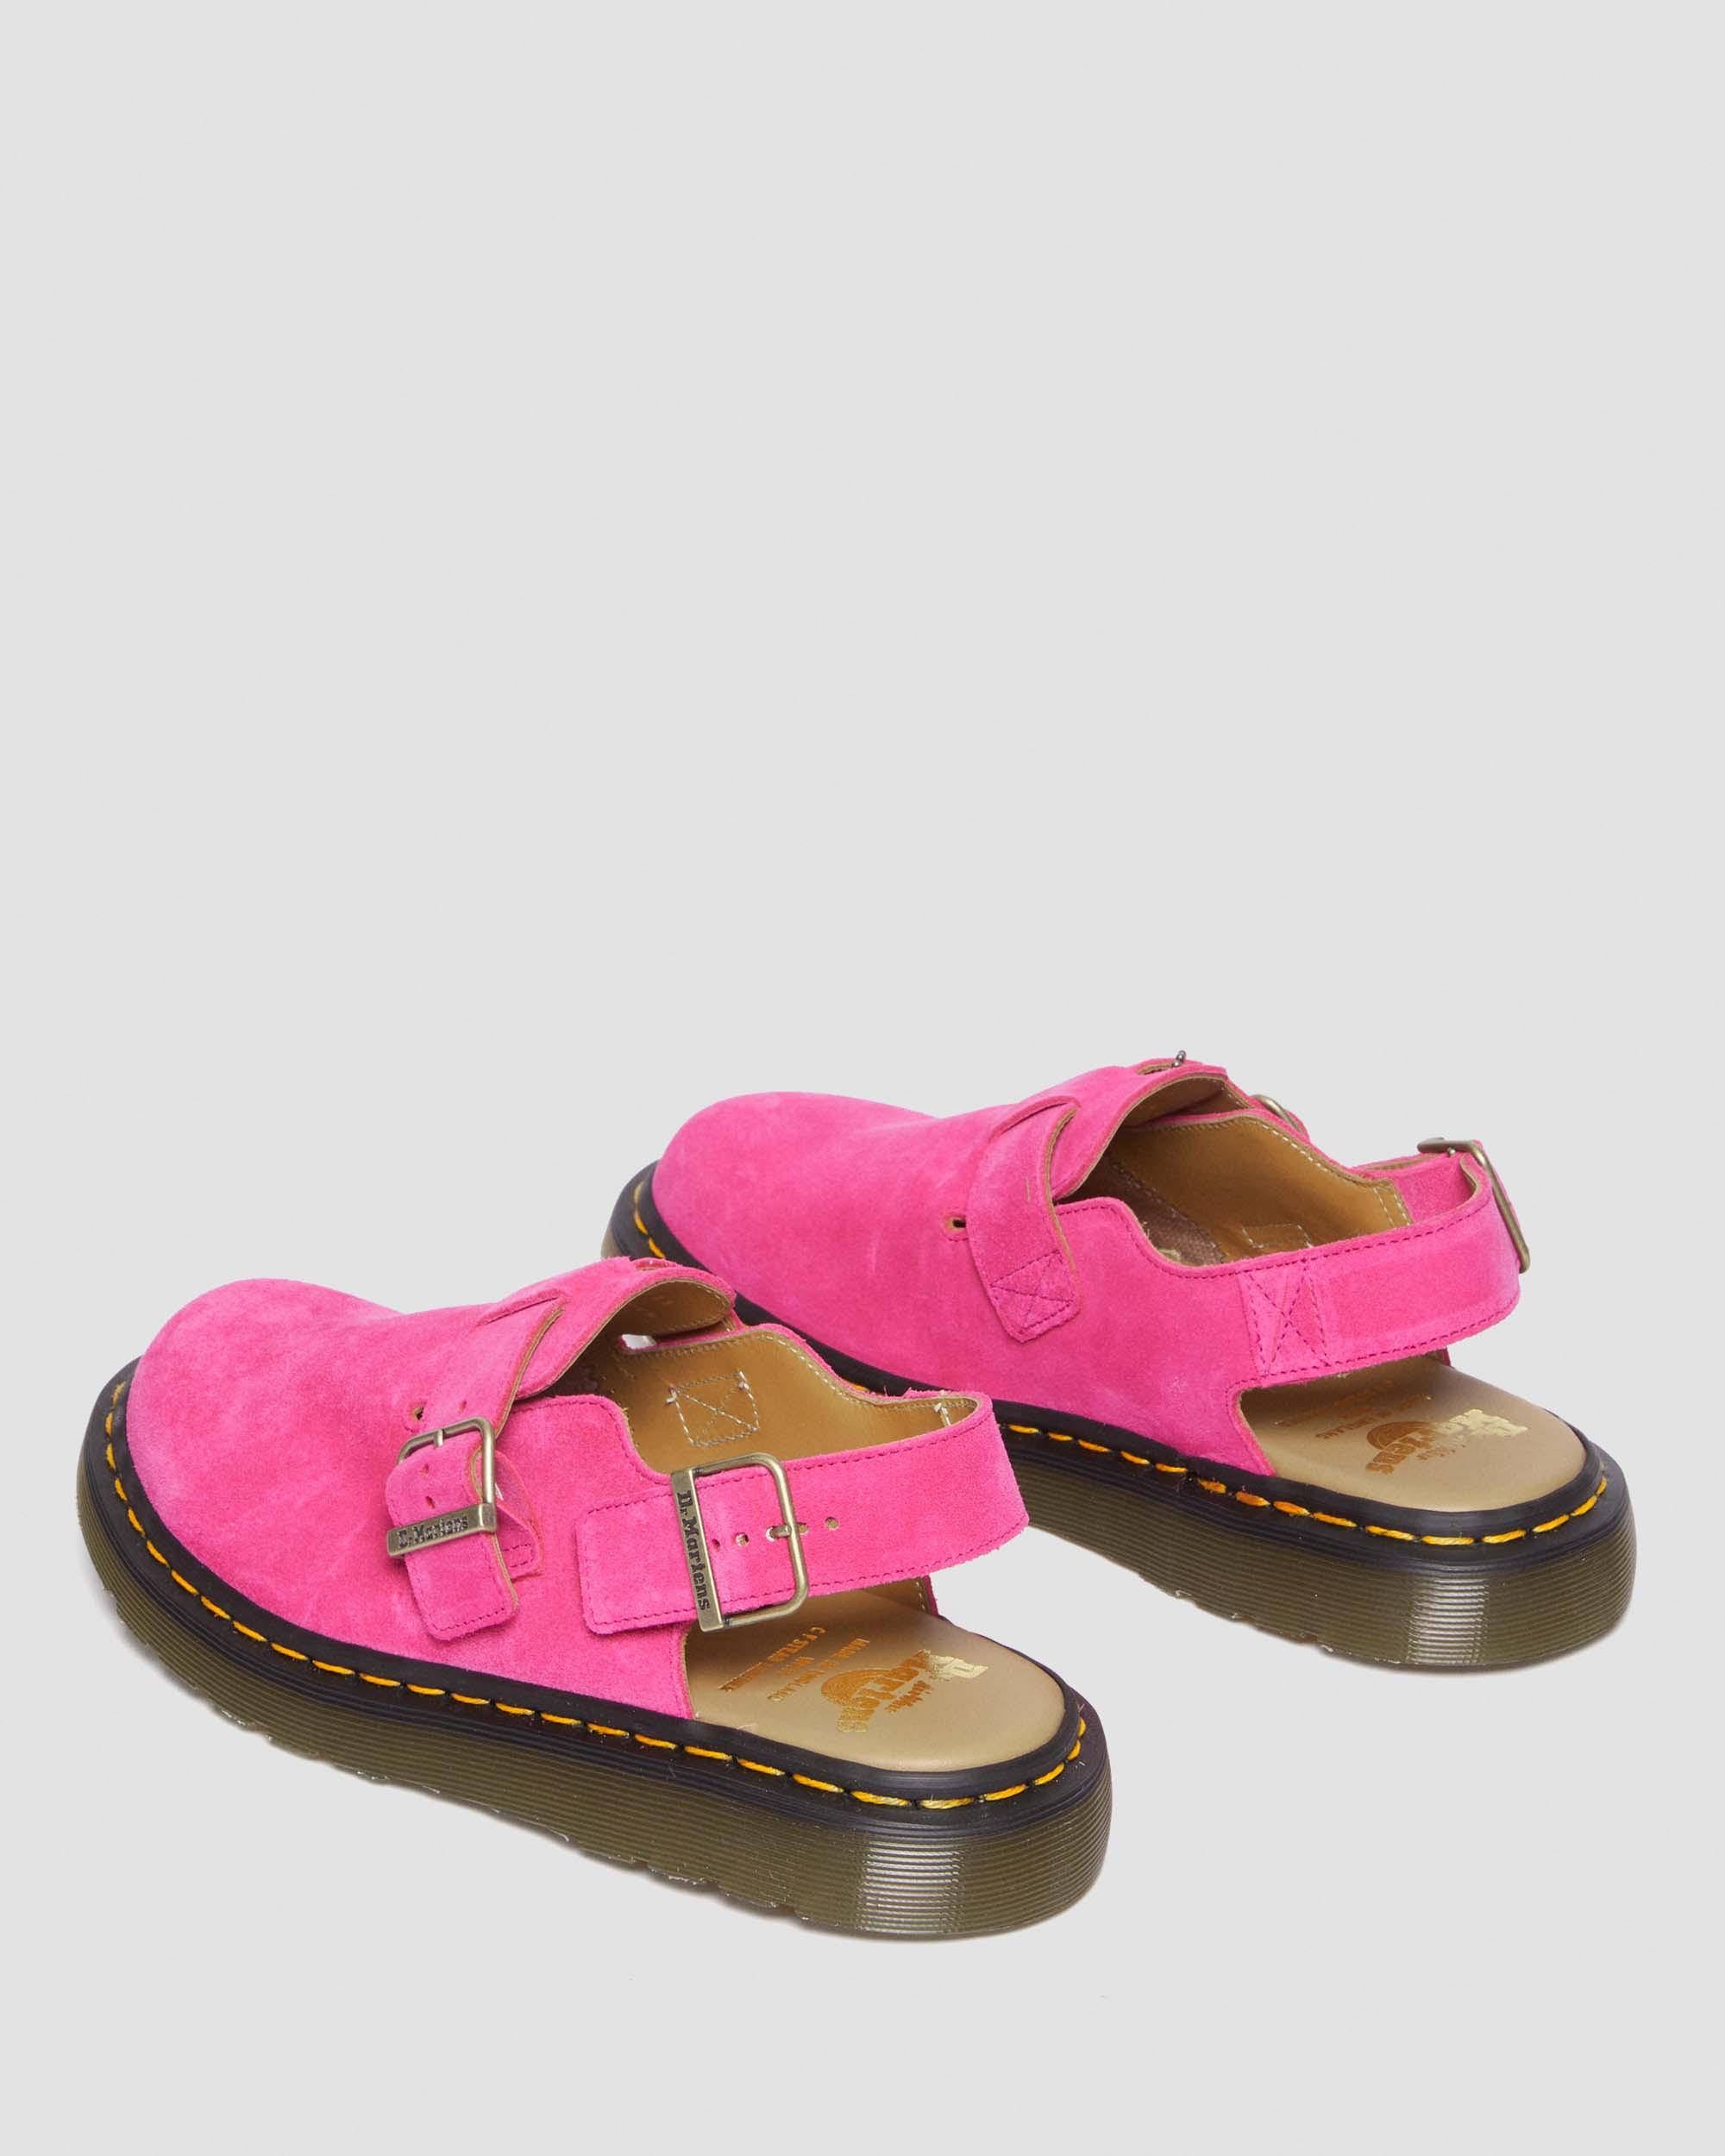 Jorge Made in England Suede Slingback Mules in Pink | Dr. Martens